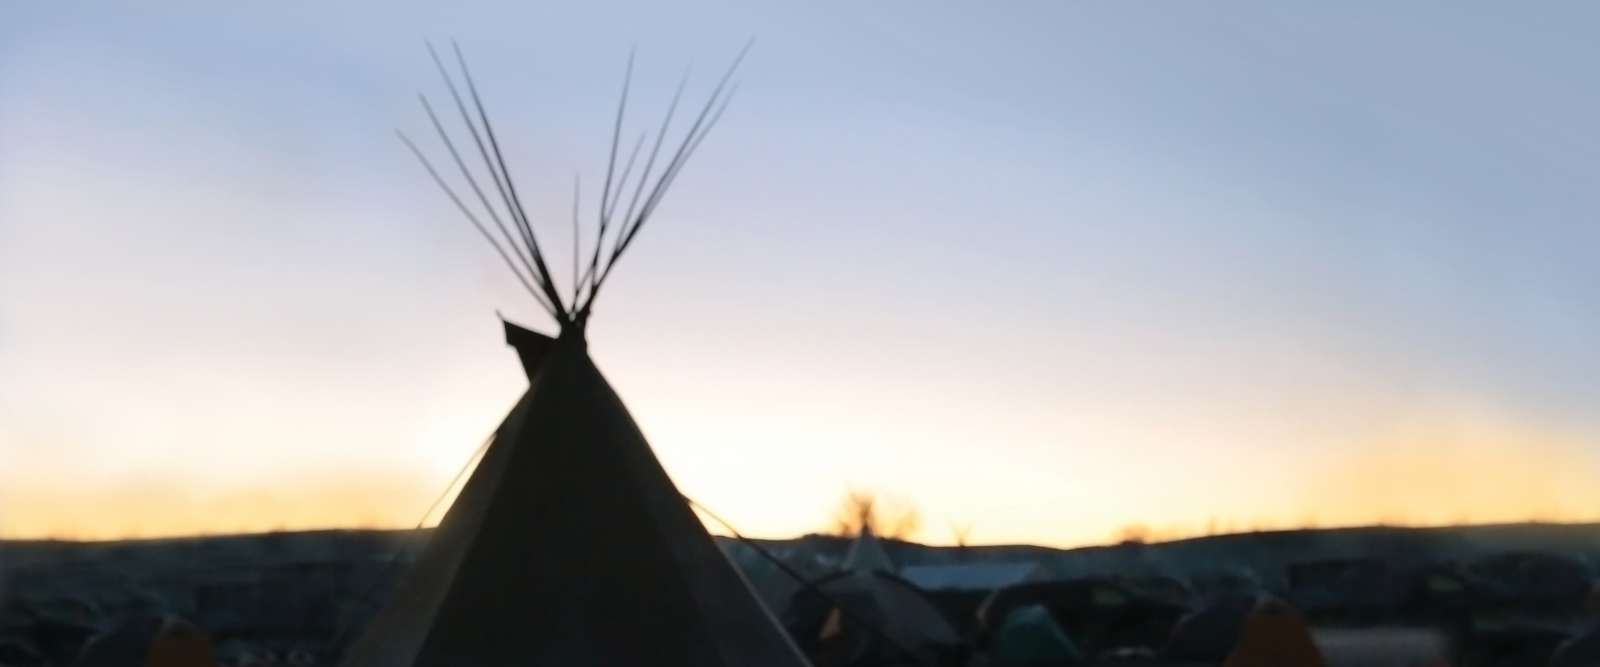 Teepee at Standing Rock